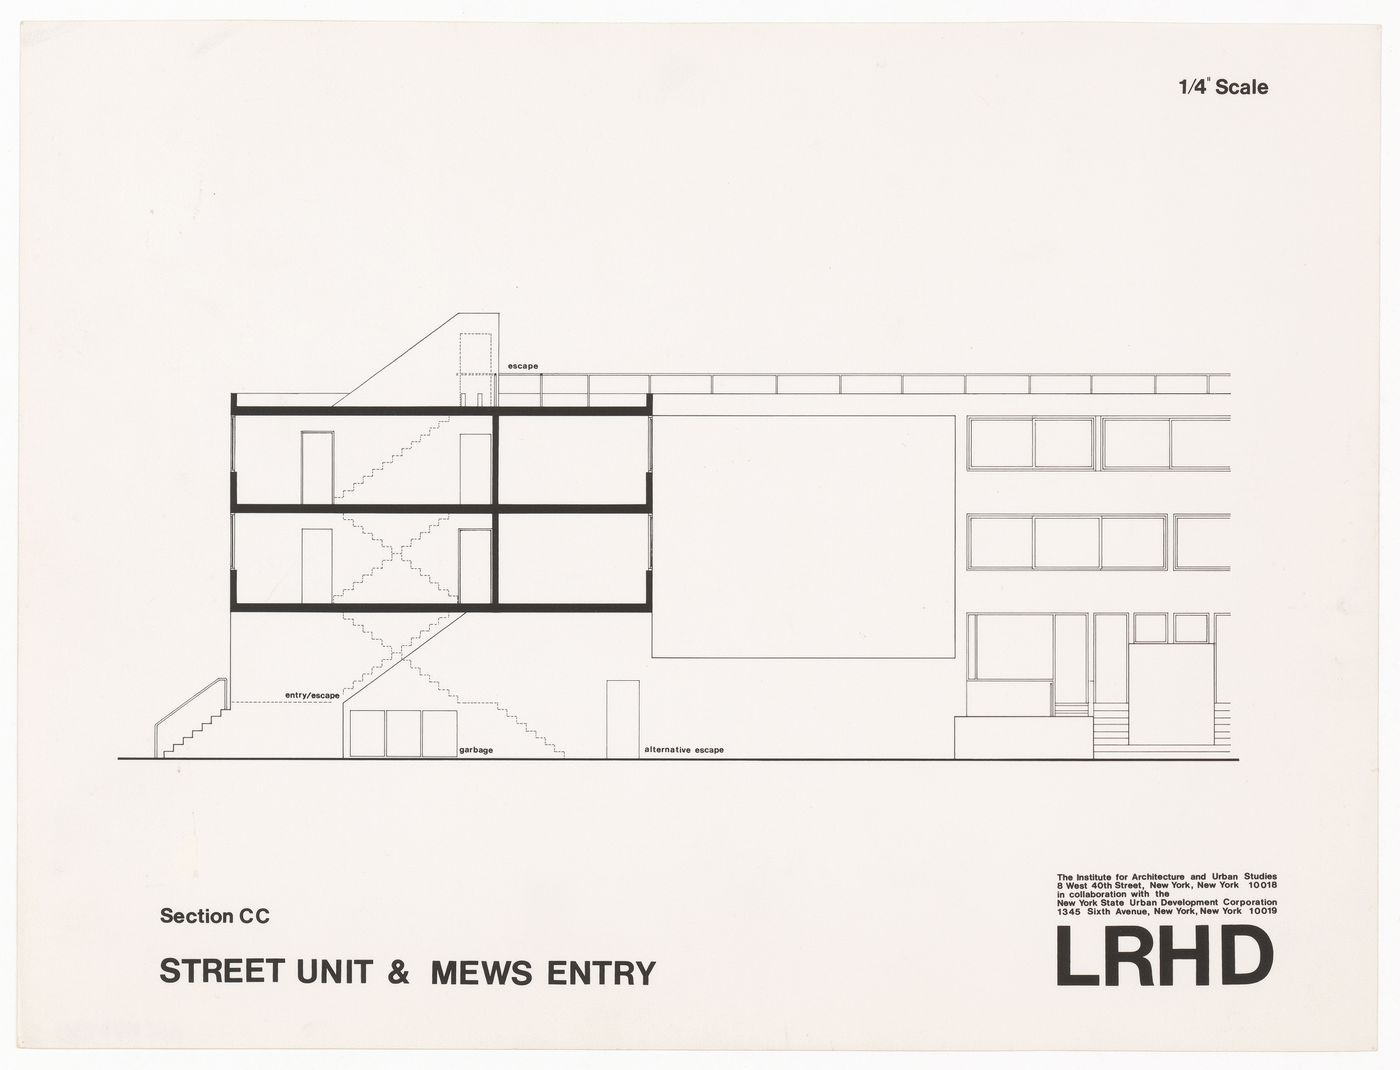 Section for street unit and mews entry for the Low-Rise High-Density MoMA exhibition